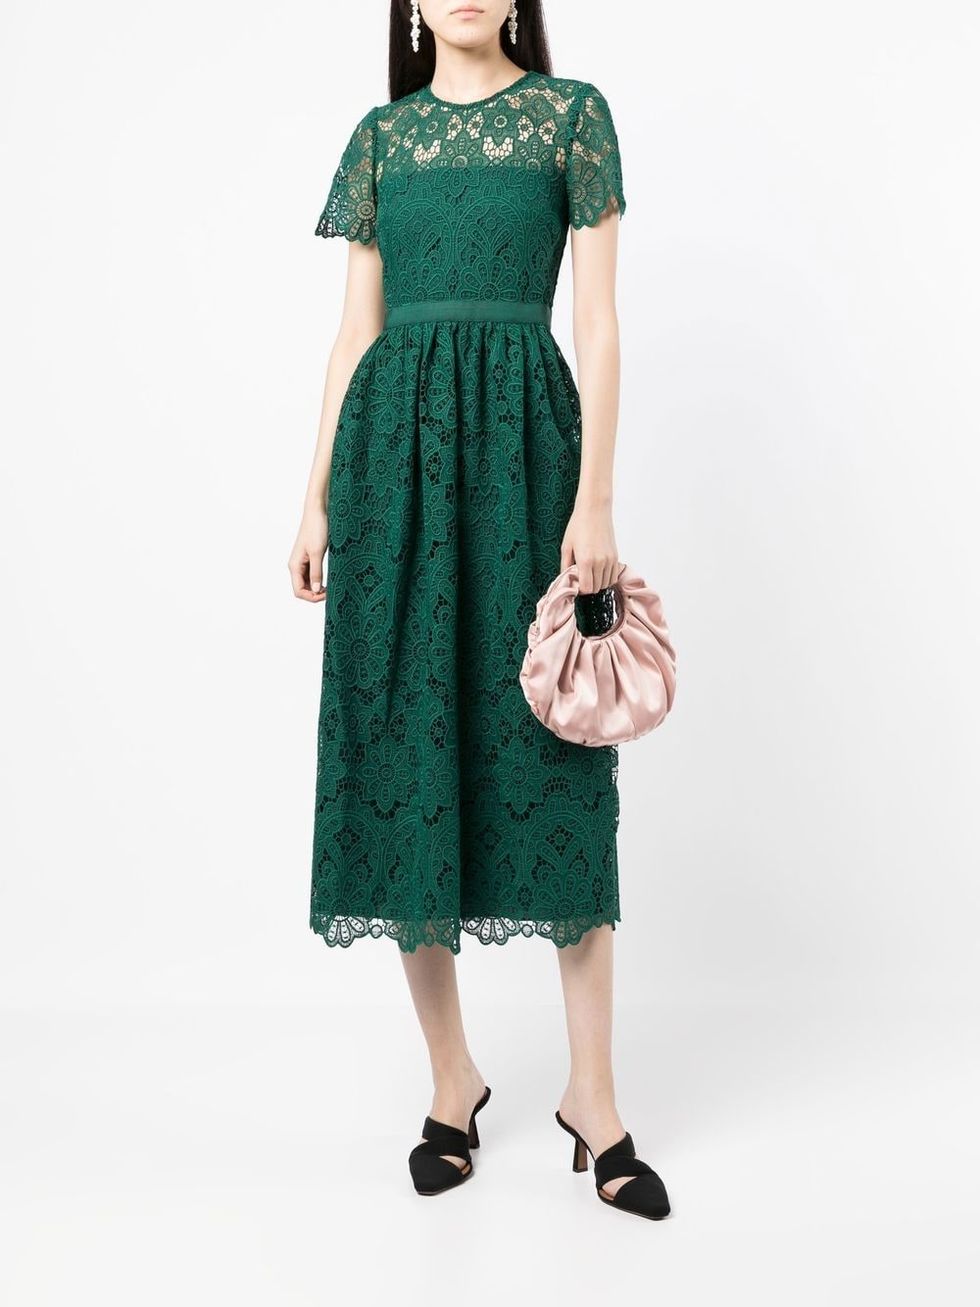 Pippa Middleton Embraces Festive Dressing in a Green Lace Self Portrait  Dress - Shop Her Look